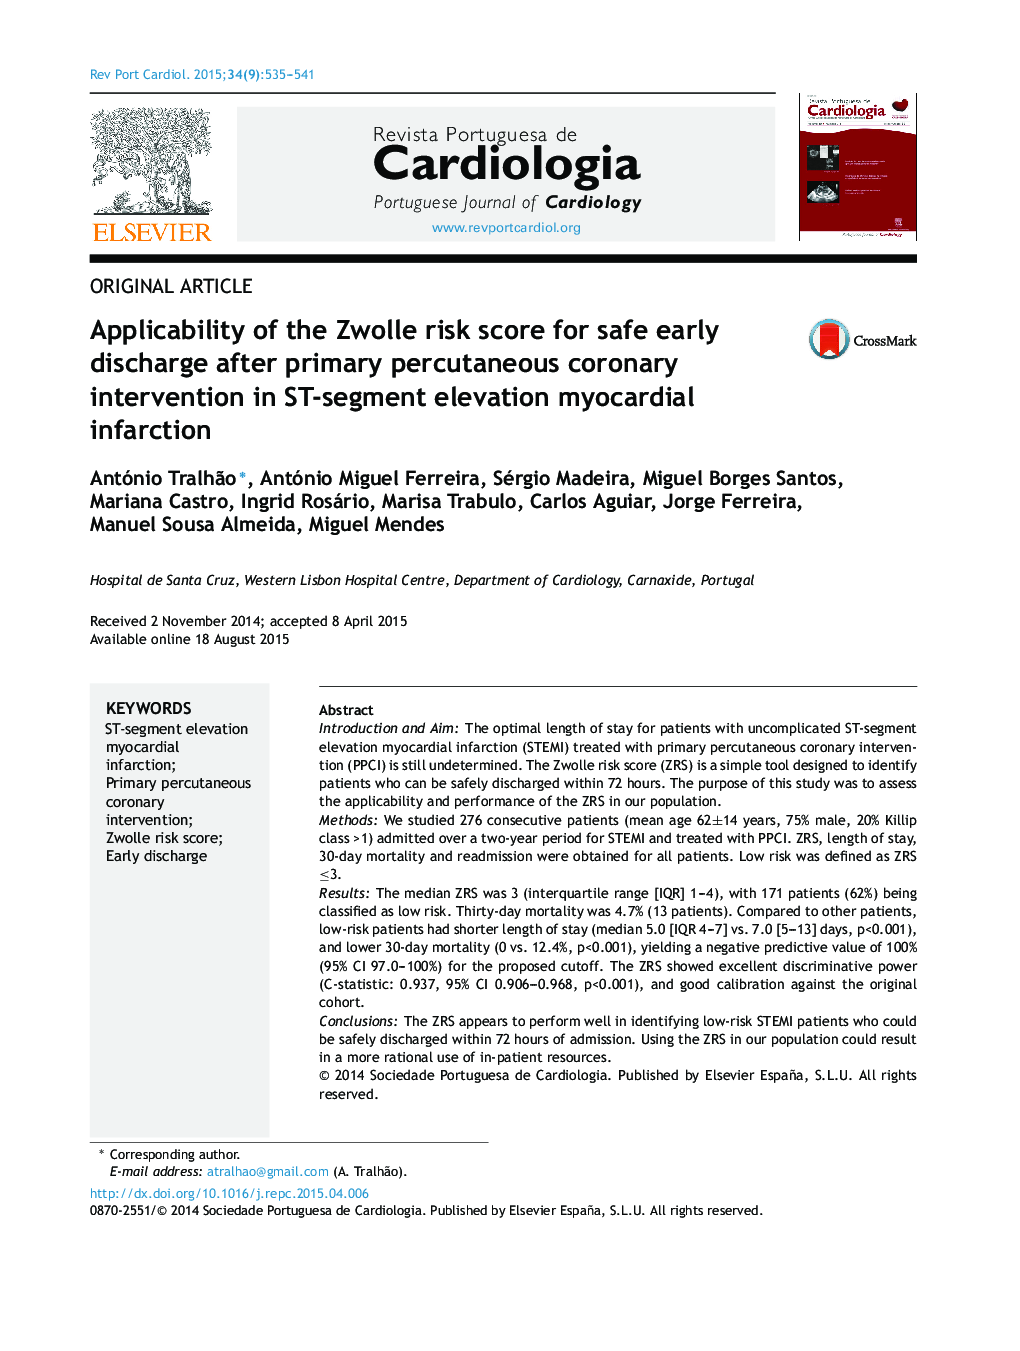 Applicability of the Zwolle risk score for safe early discharge after primary percutaneous coronary intervention in ST-segment elevation myocardial infarction